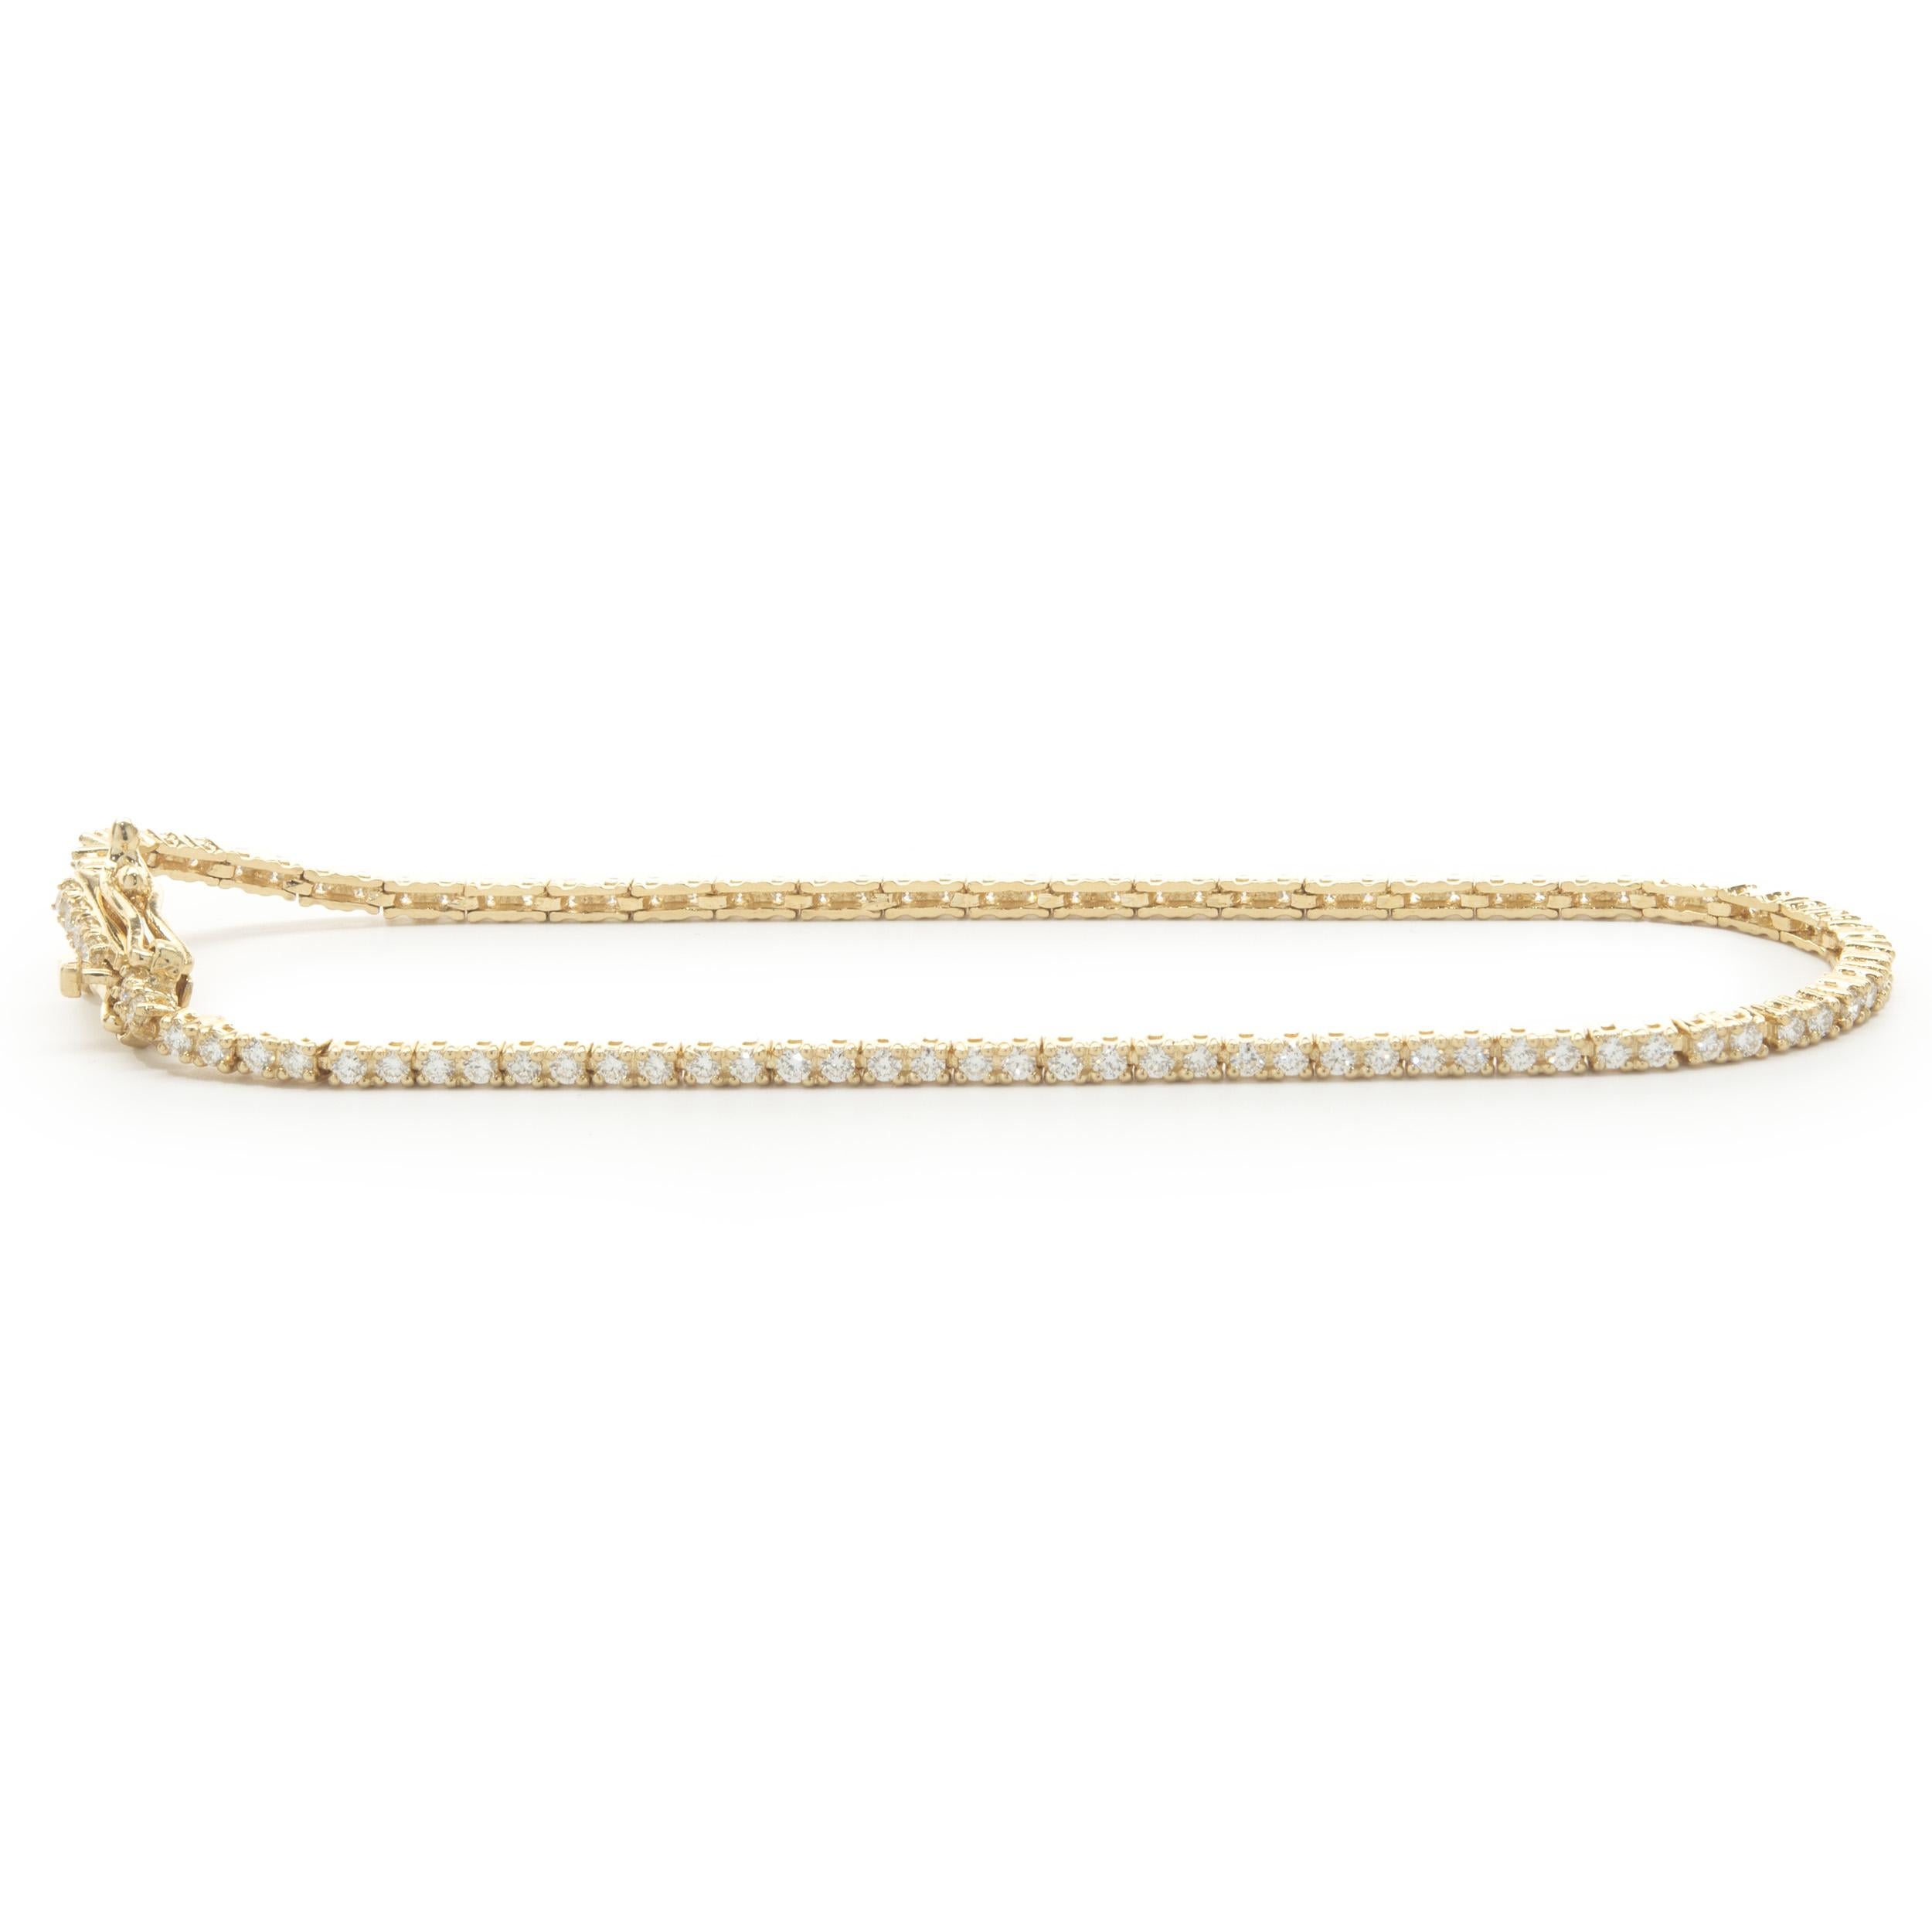 Material: 14K yellow gold
Diamonds: 96 round brilliant cut = 1.00cttw
Color: H 
Clarity: SI1
Dimensions: bracelet will fit up to a 7-inch wrist 
Weight: 4.59 grams